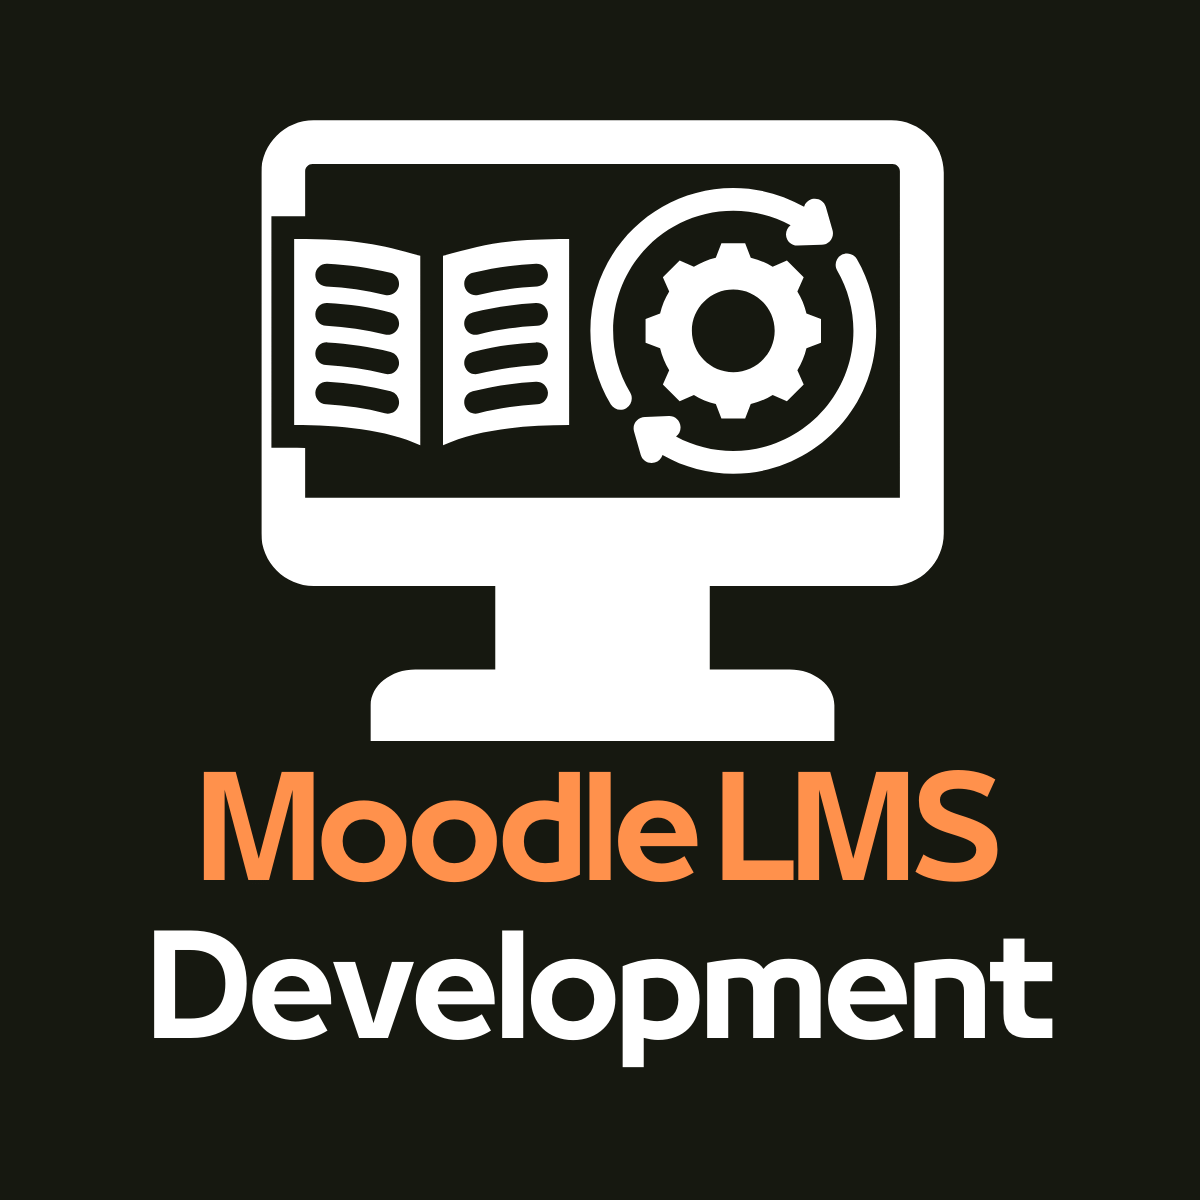 Moodle LMS Development Company in India